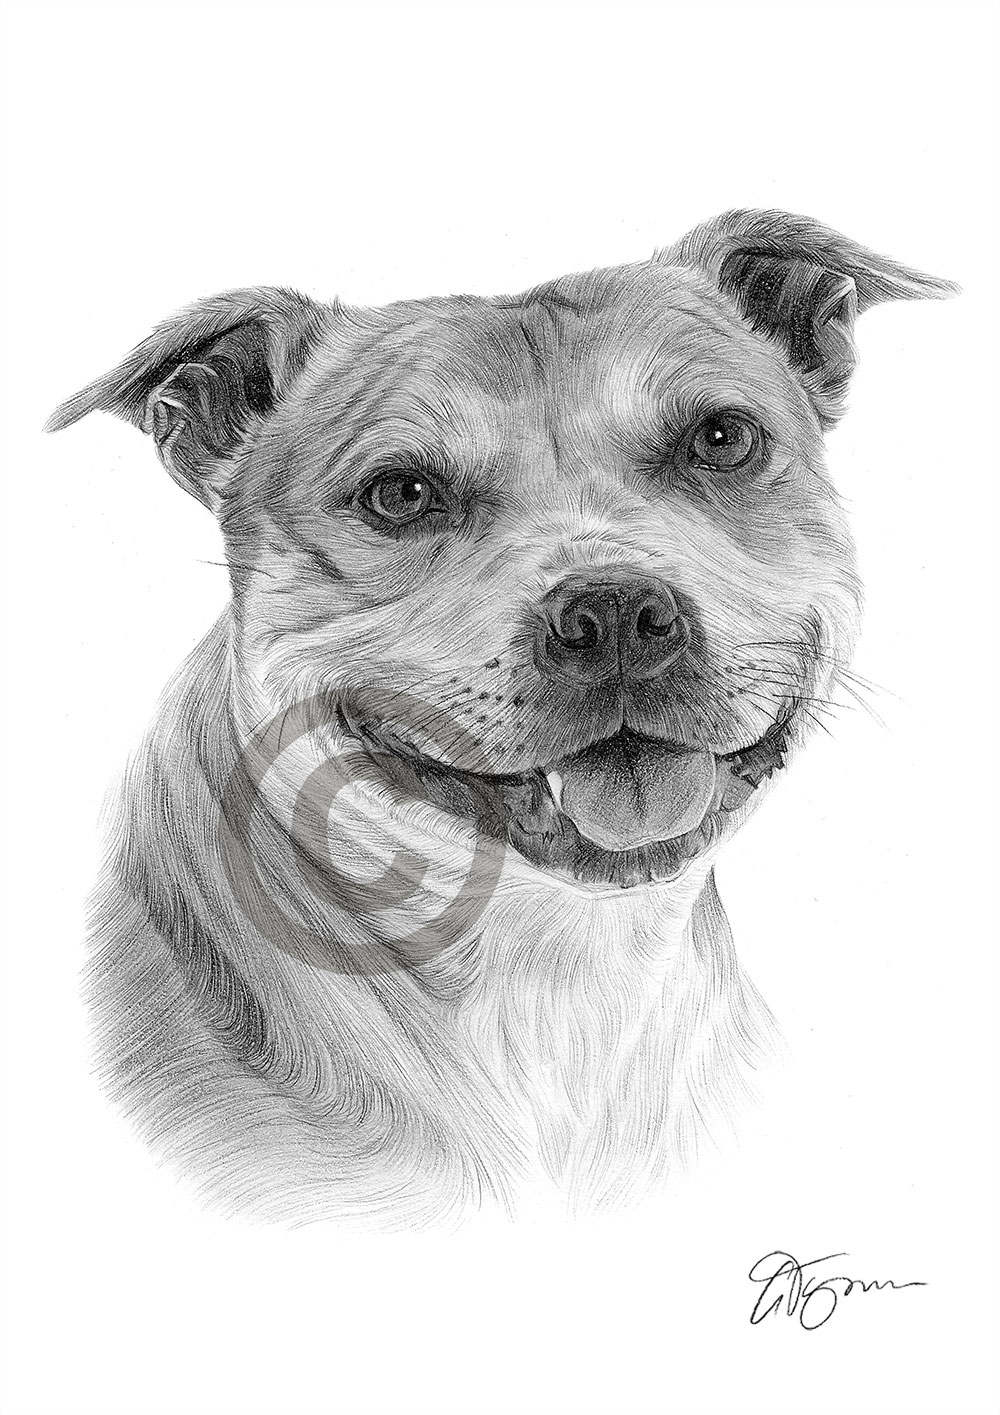 Pencil drawing of a young Staffordshire Bull Terrier